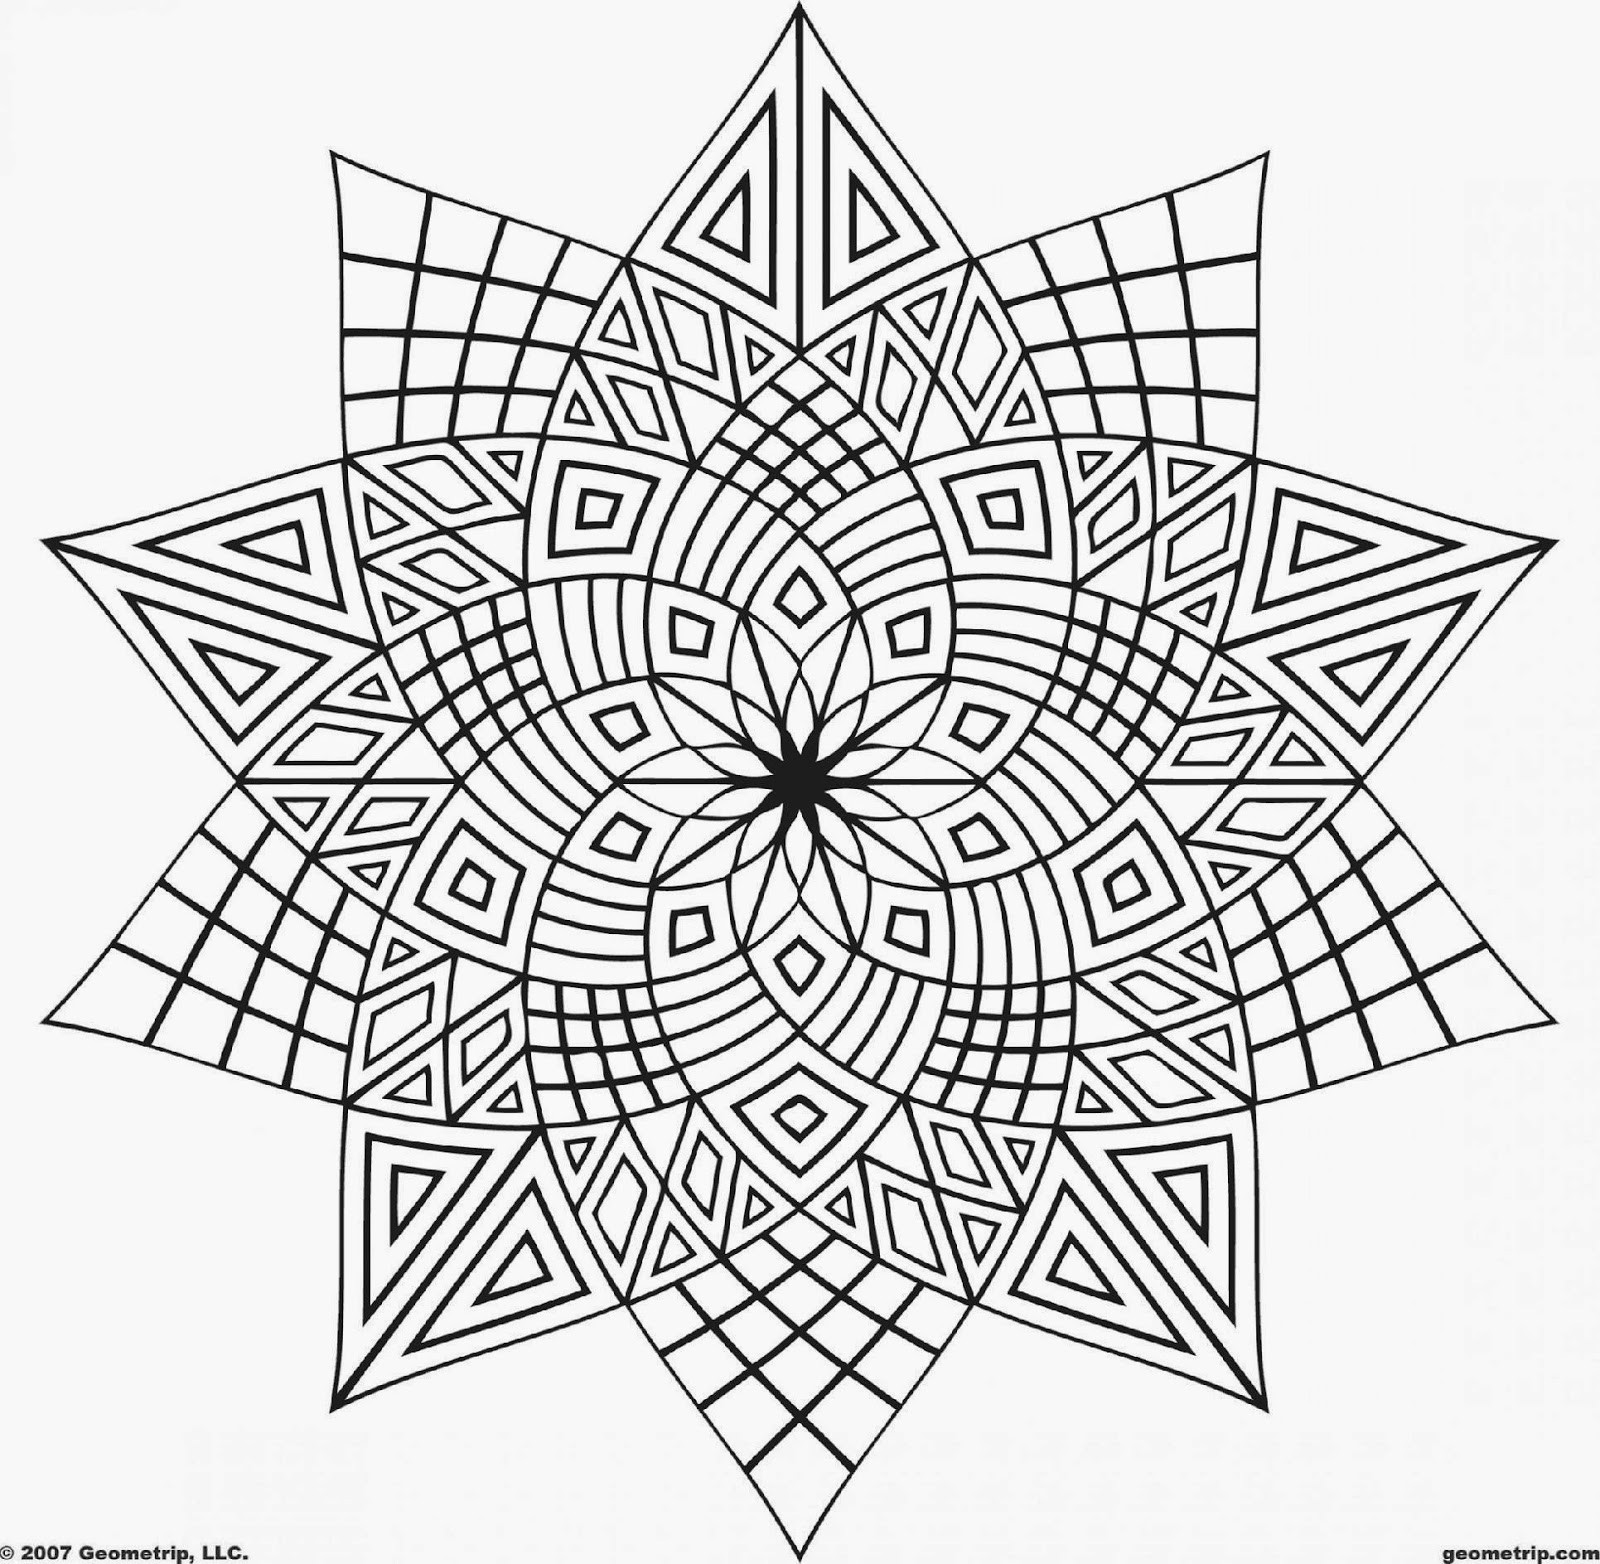 Awesome Coloring Pages For Adults
 Diwali Crafts For Children Pinterest Diwali Diwali